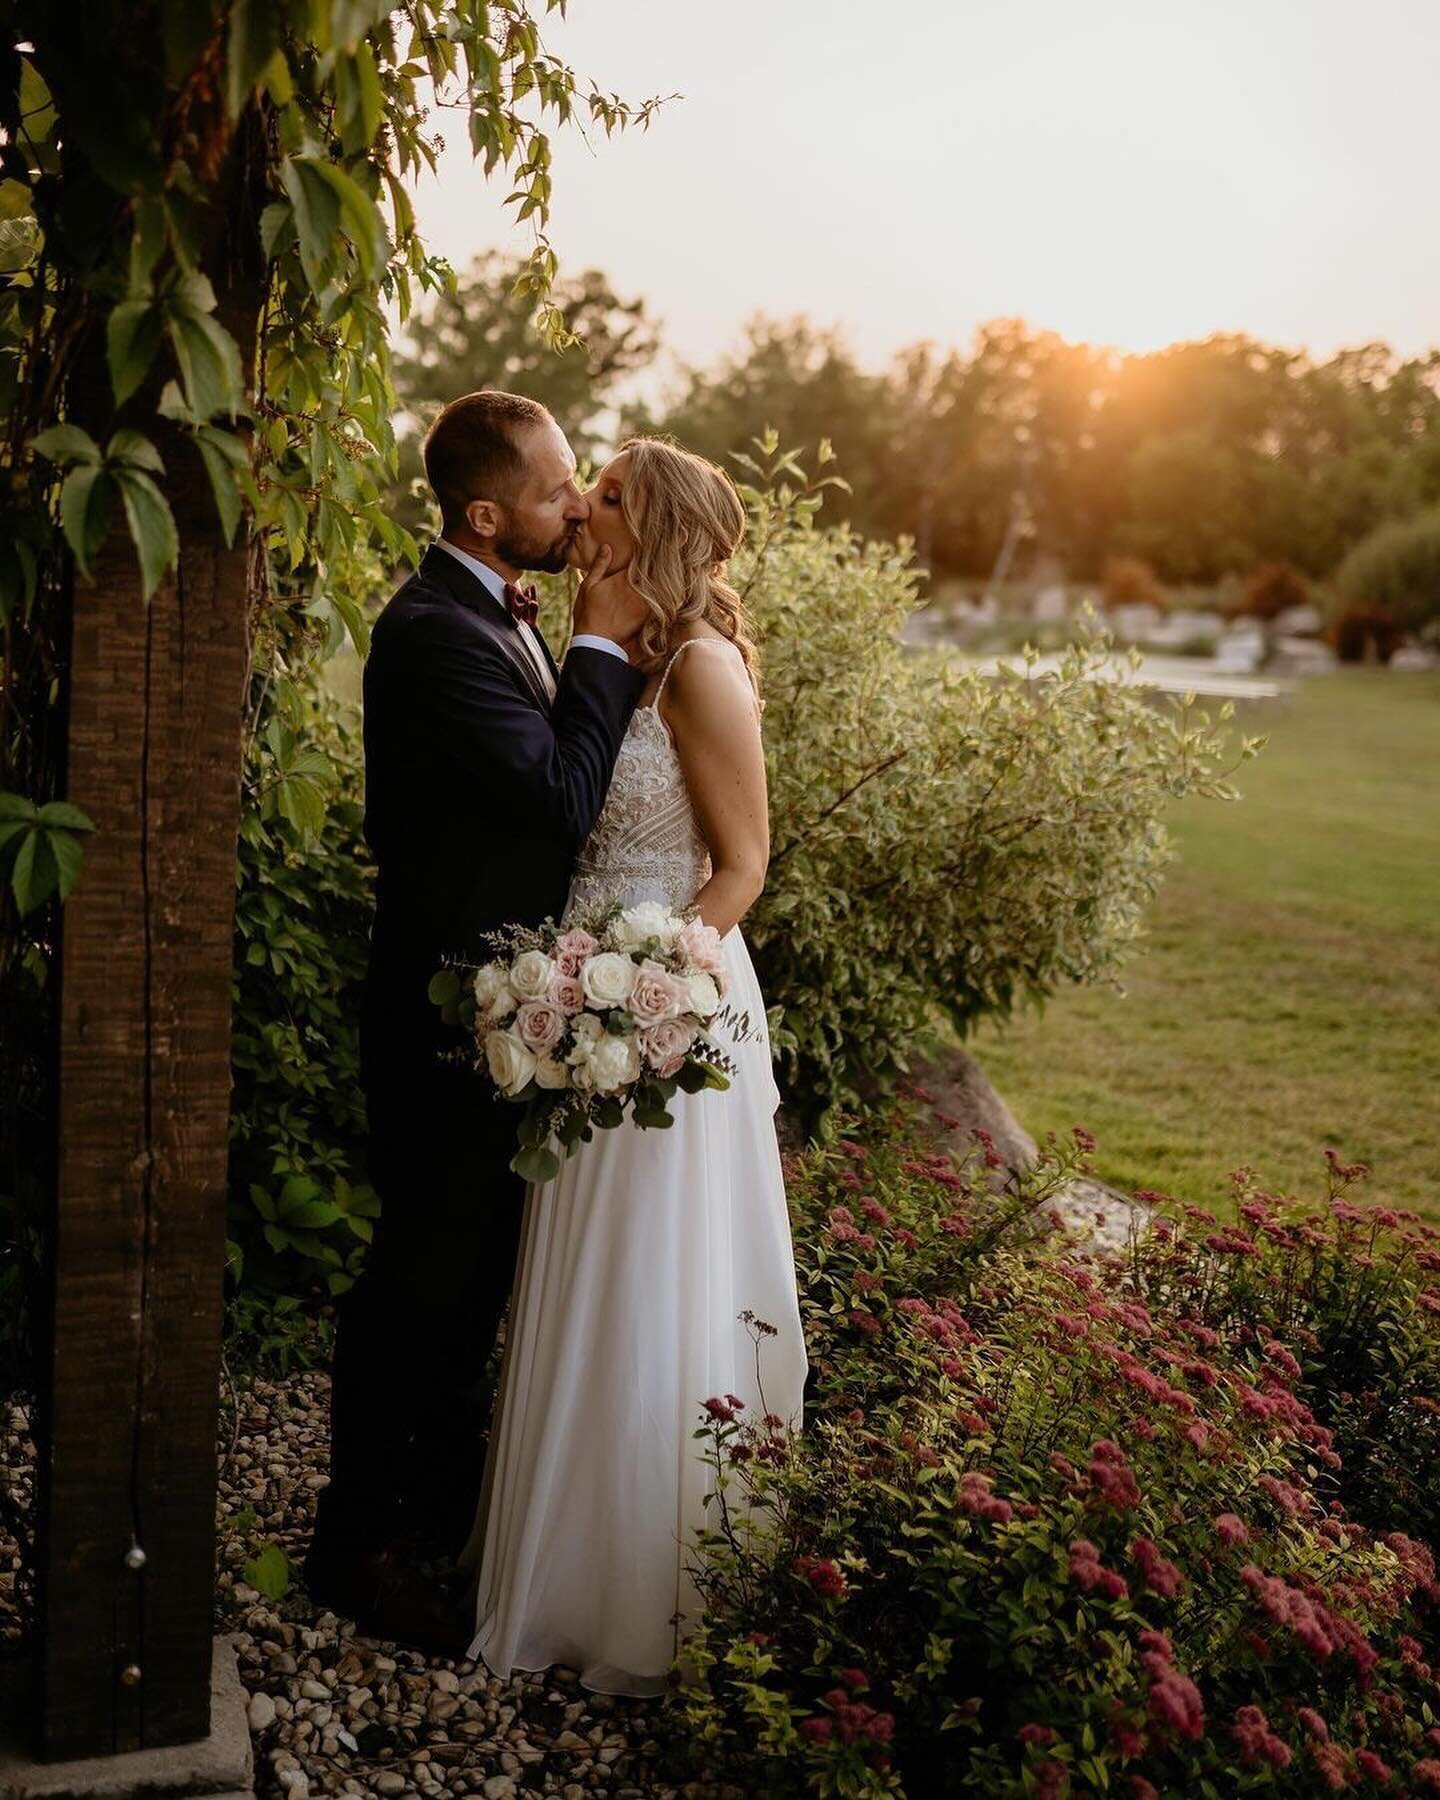 Chris gave his beautiful bride Kim all the props she deserved in creating this gorgeous wedding day at @hawthornestates. From the lanterns that lined the walkway of the ceremony to the popcorn + champagne bar and all the littlest of details that made